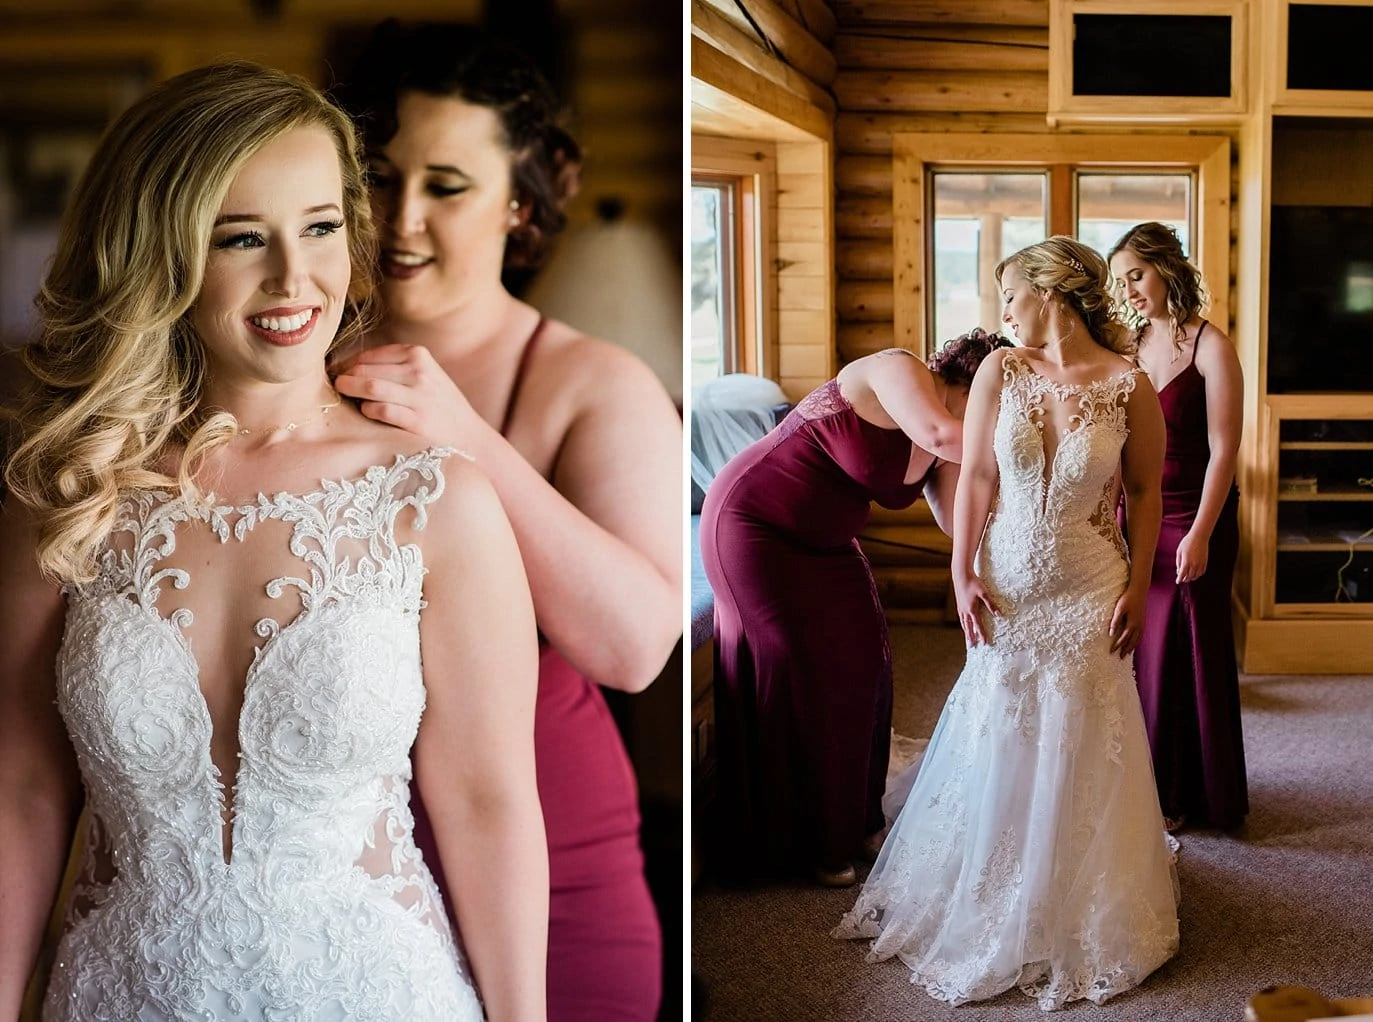 bride getting into wedding dress with help of bridesmaids by window at Pagosa Springs wedding by Pagosa Springs Wedding Photographer Jennie Crate